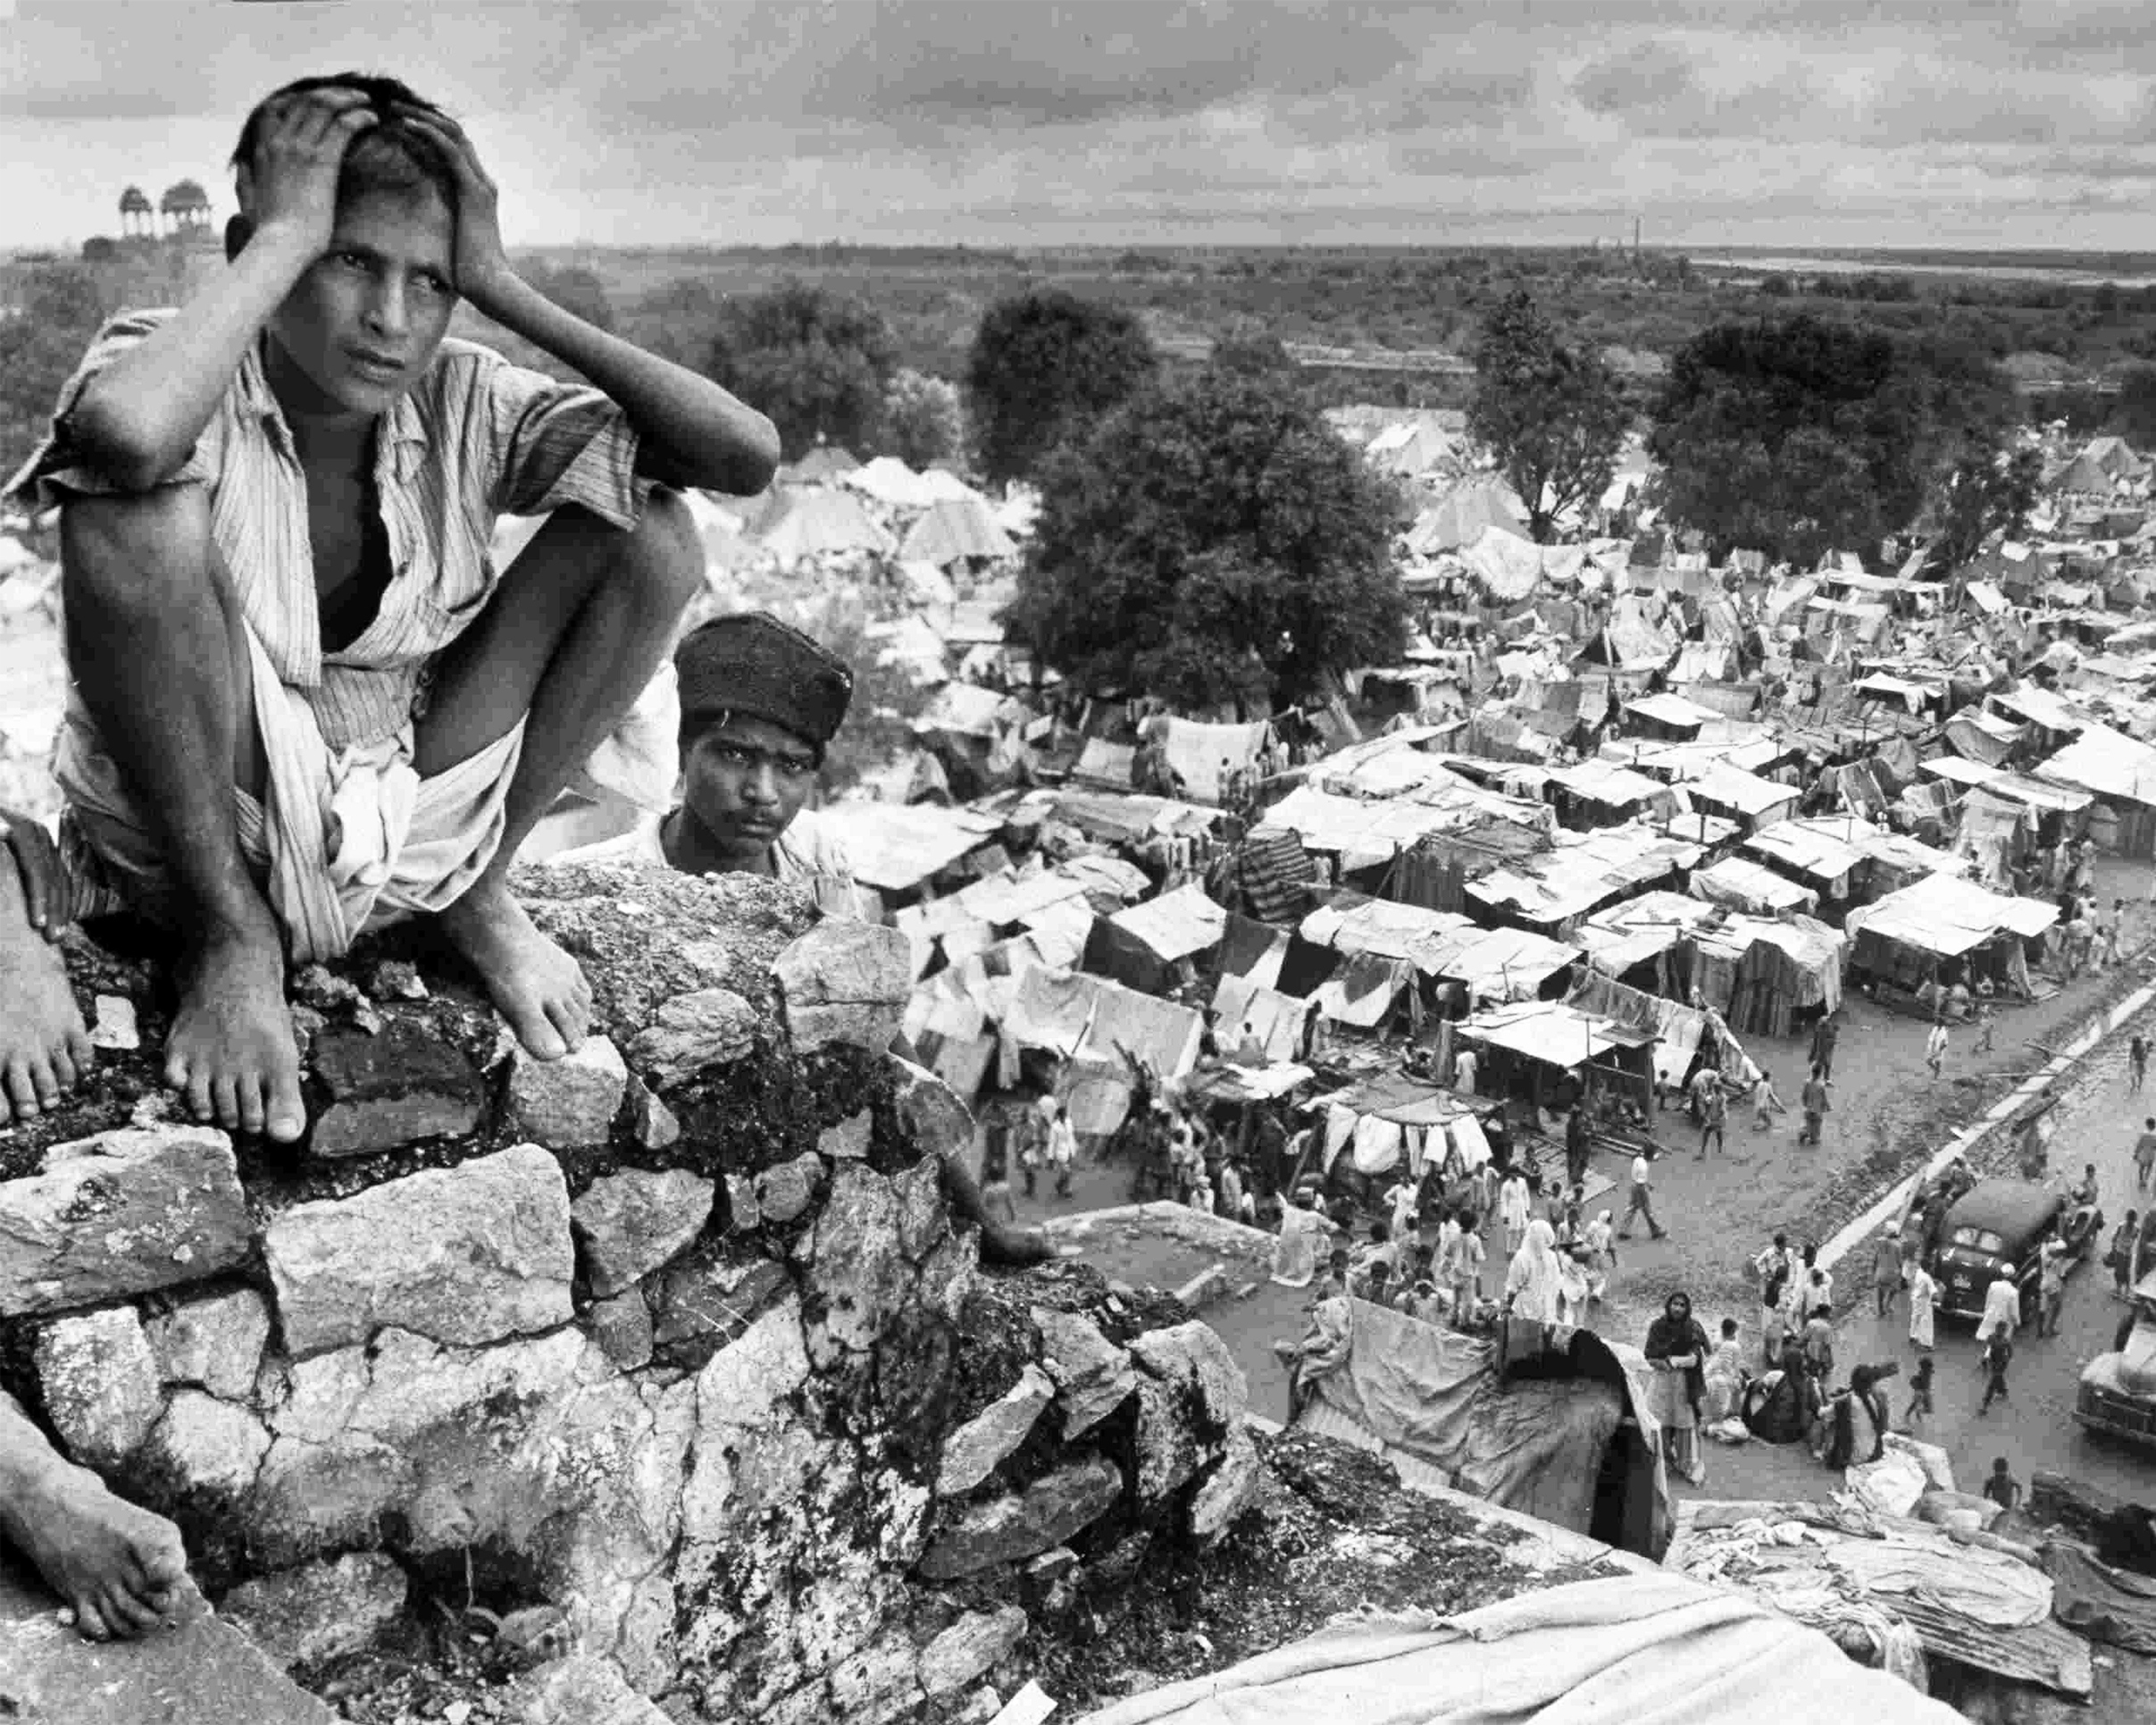 A photo showing a boy sitting on the walls of a refugee camp in Delhi during the Partition of India in 1947.